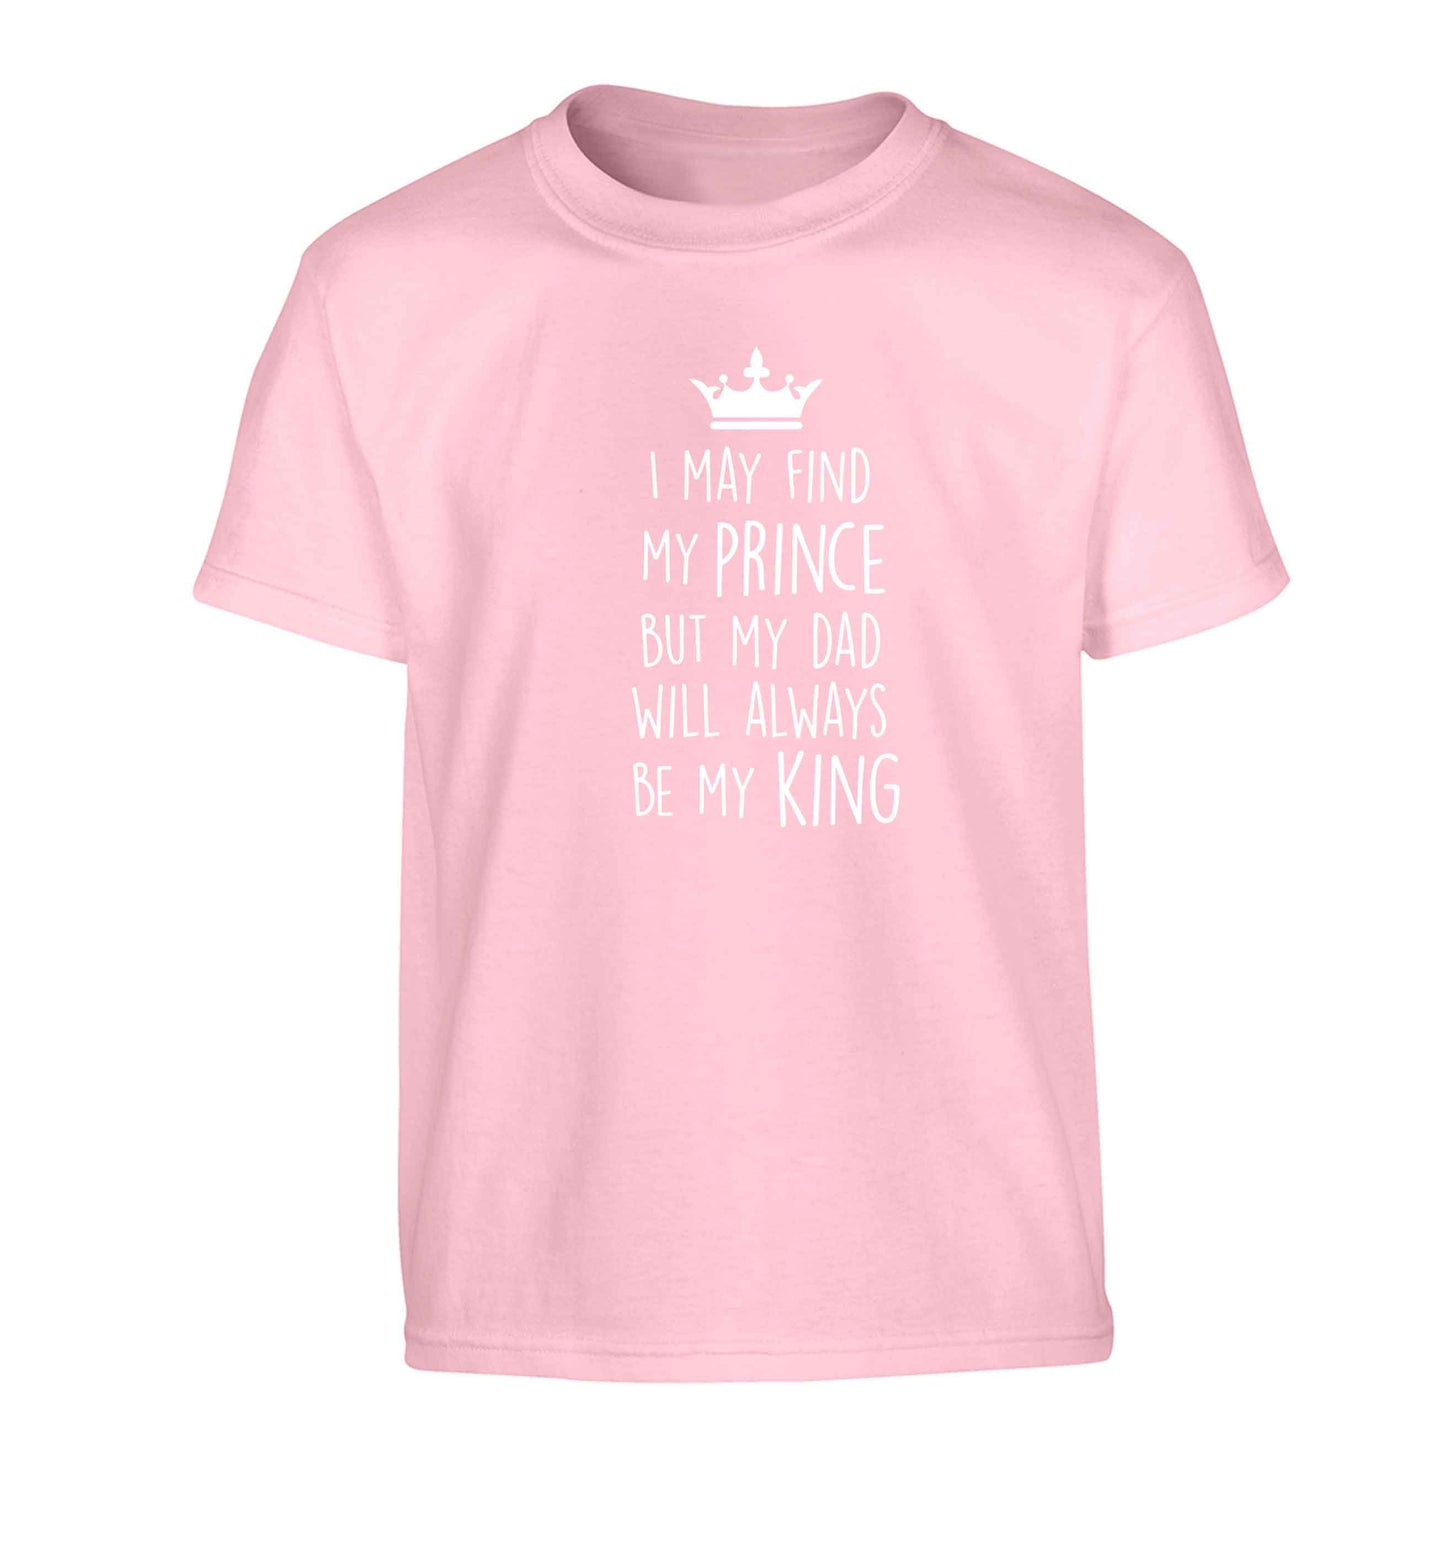 I may find my prince but my dad will always be my king Children's light pink Tshirt 12-13 Years